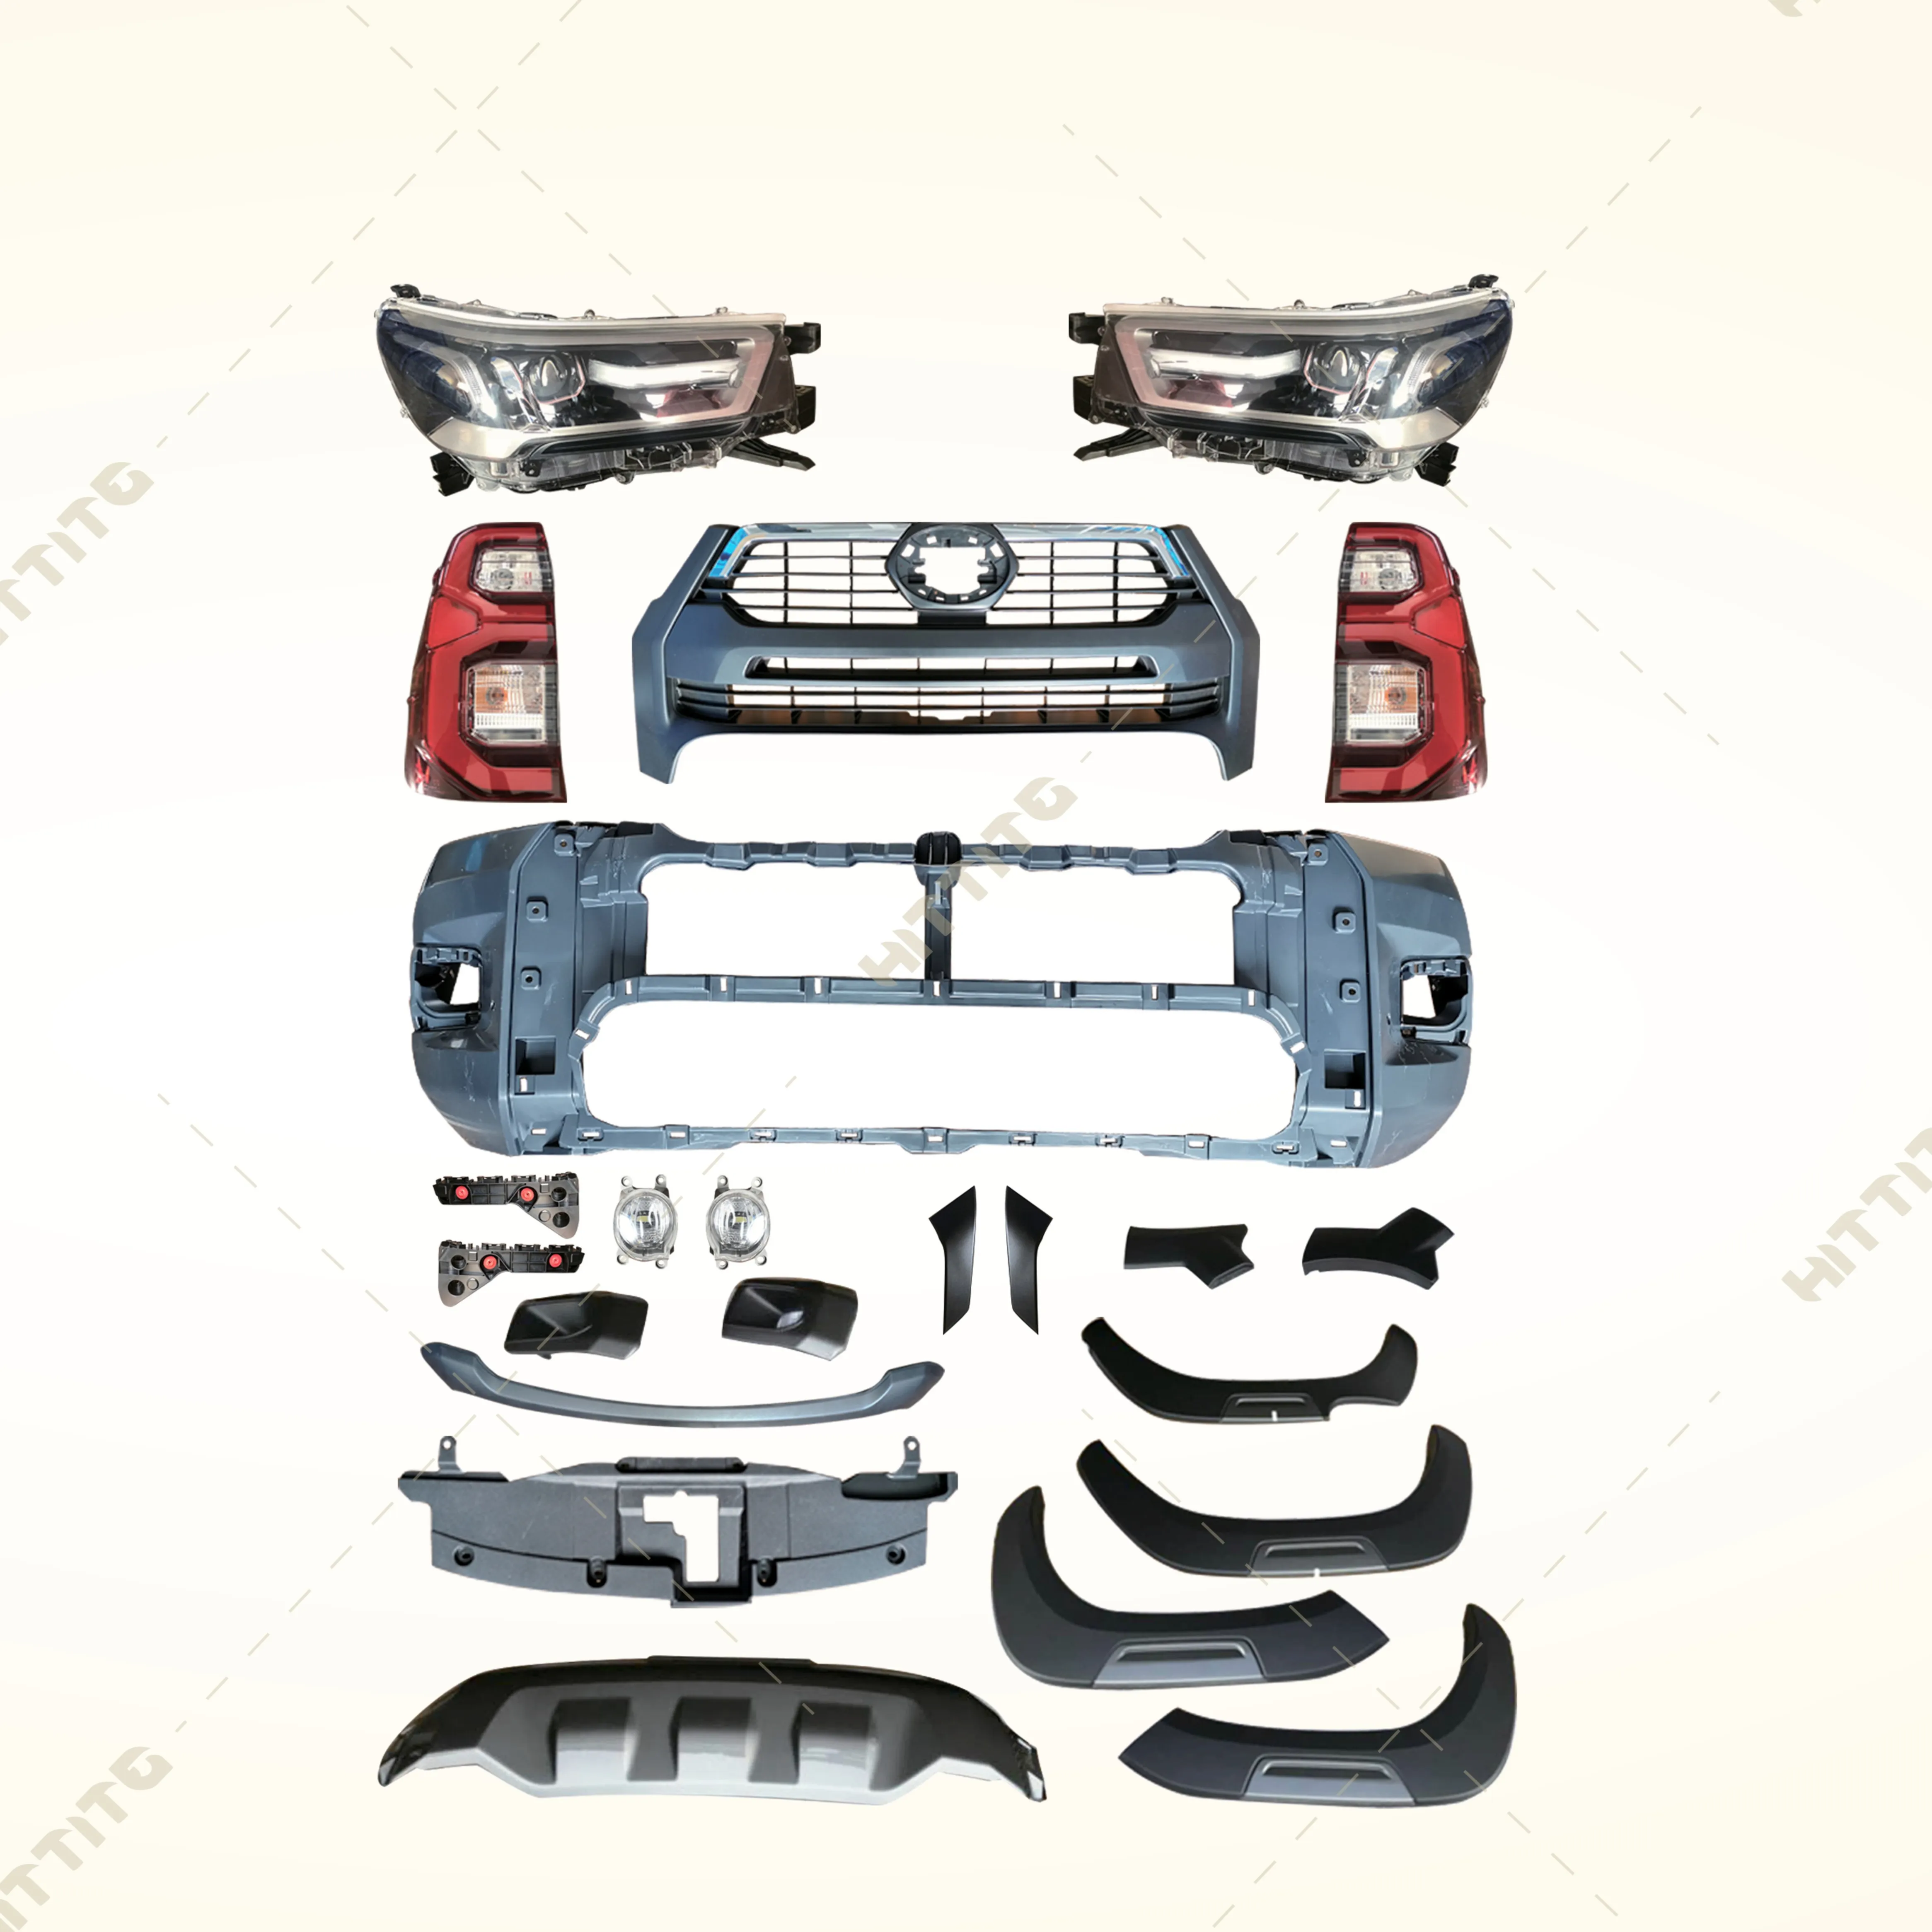 Body Kit Full Set Front Bumper Suitable for Toyota Hilux Revo 2016, Upgrade to Hilux Rocco 2021